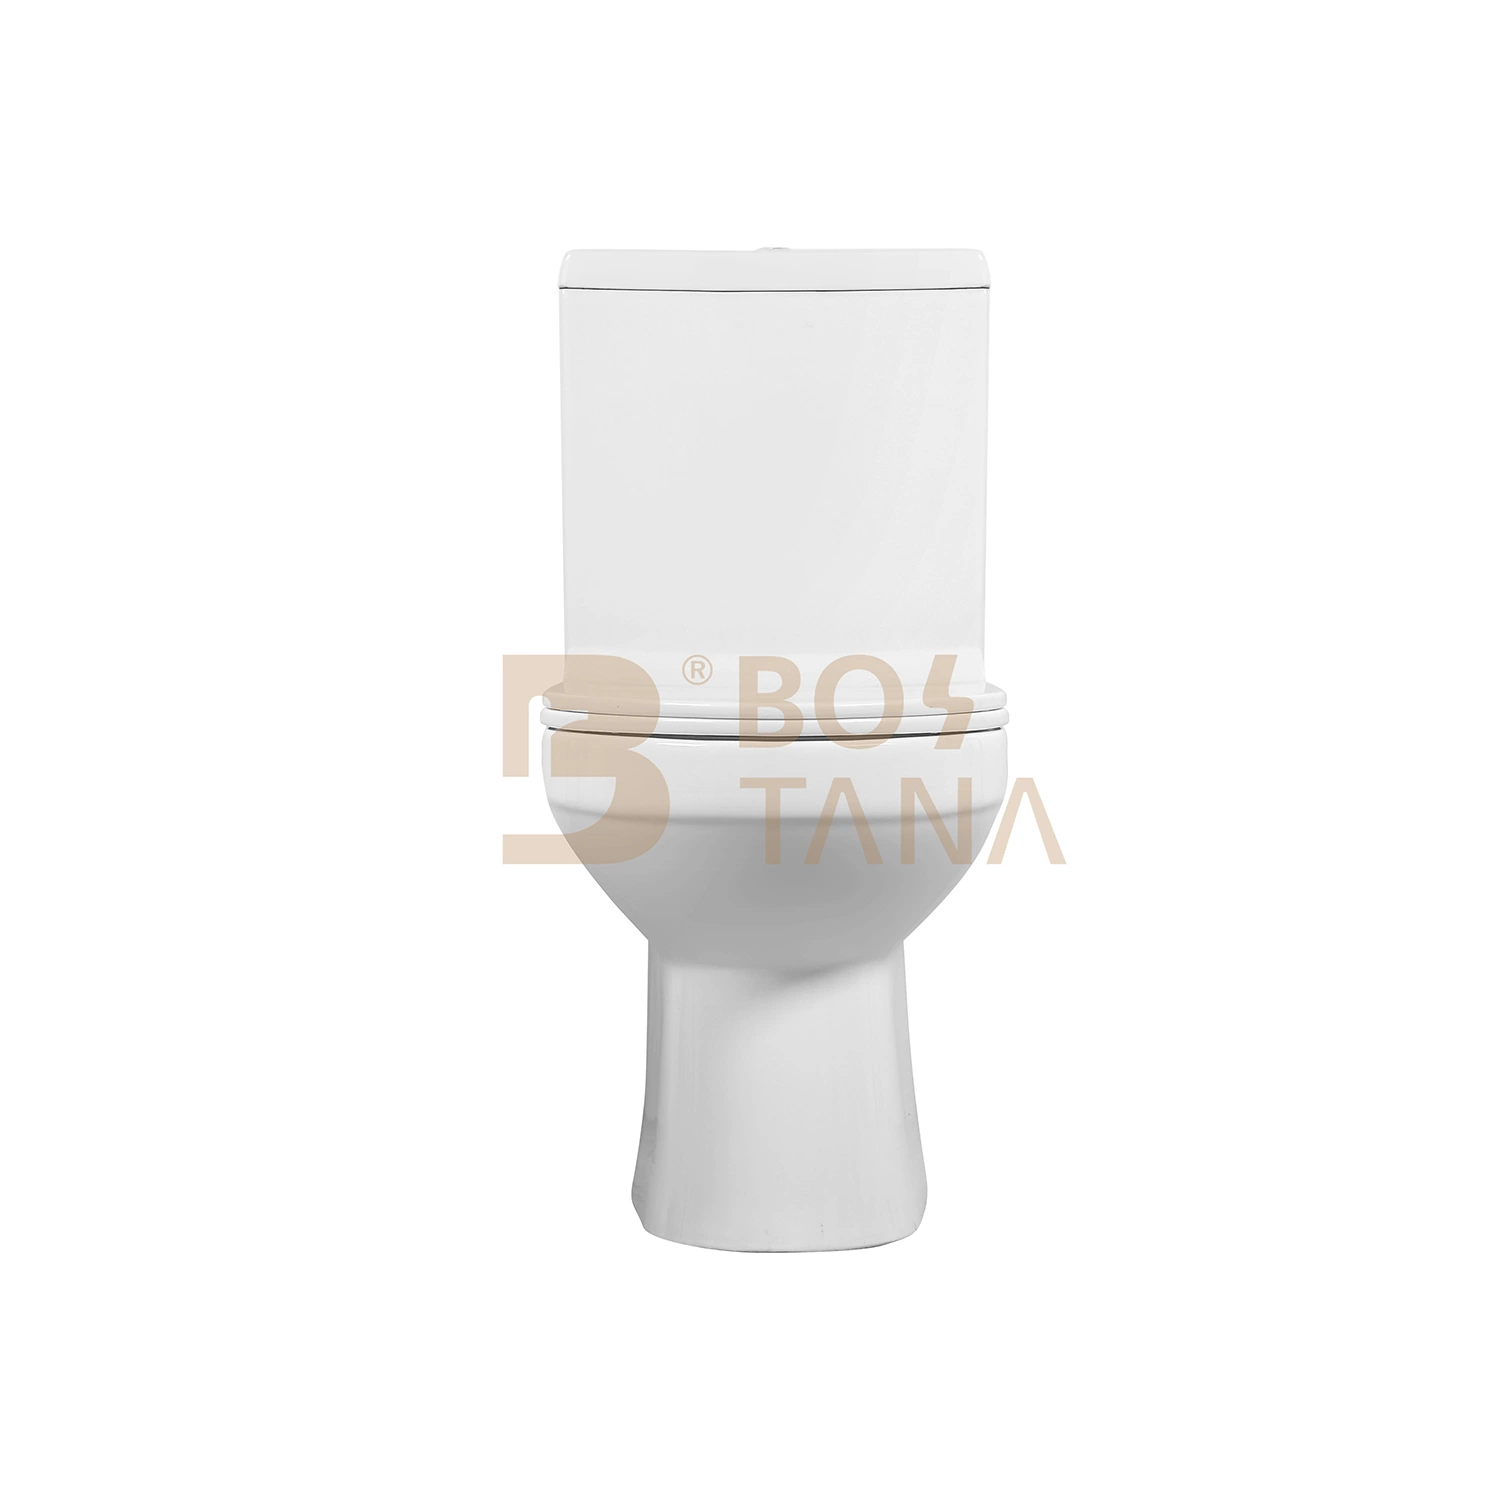 China Supply Home Accessories Ceramic Bathroom Washdown Two Piece Toilet